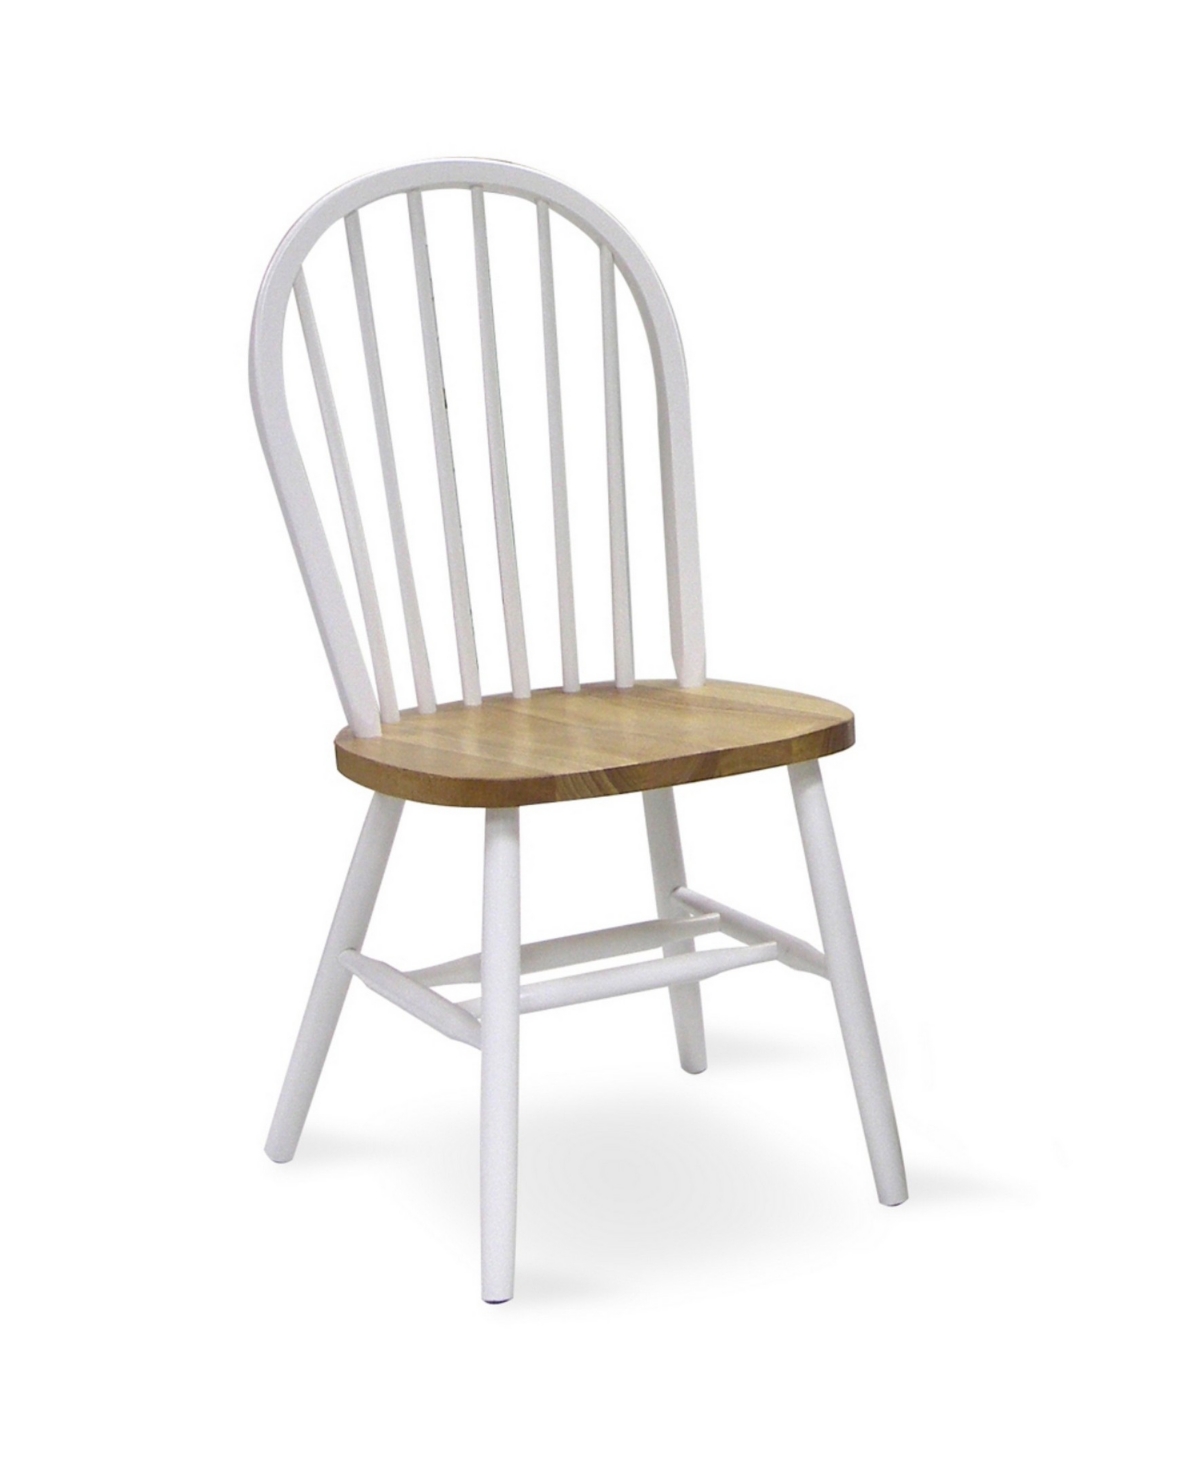 International Concepts Windsor 37" High Spindleback Chair In White